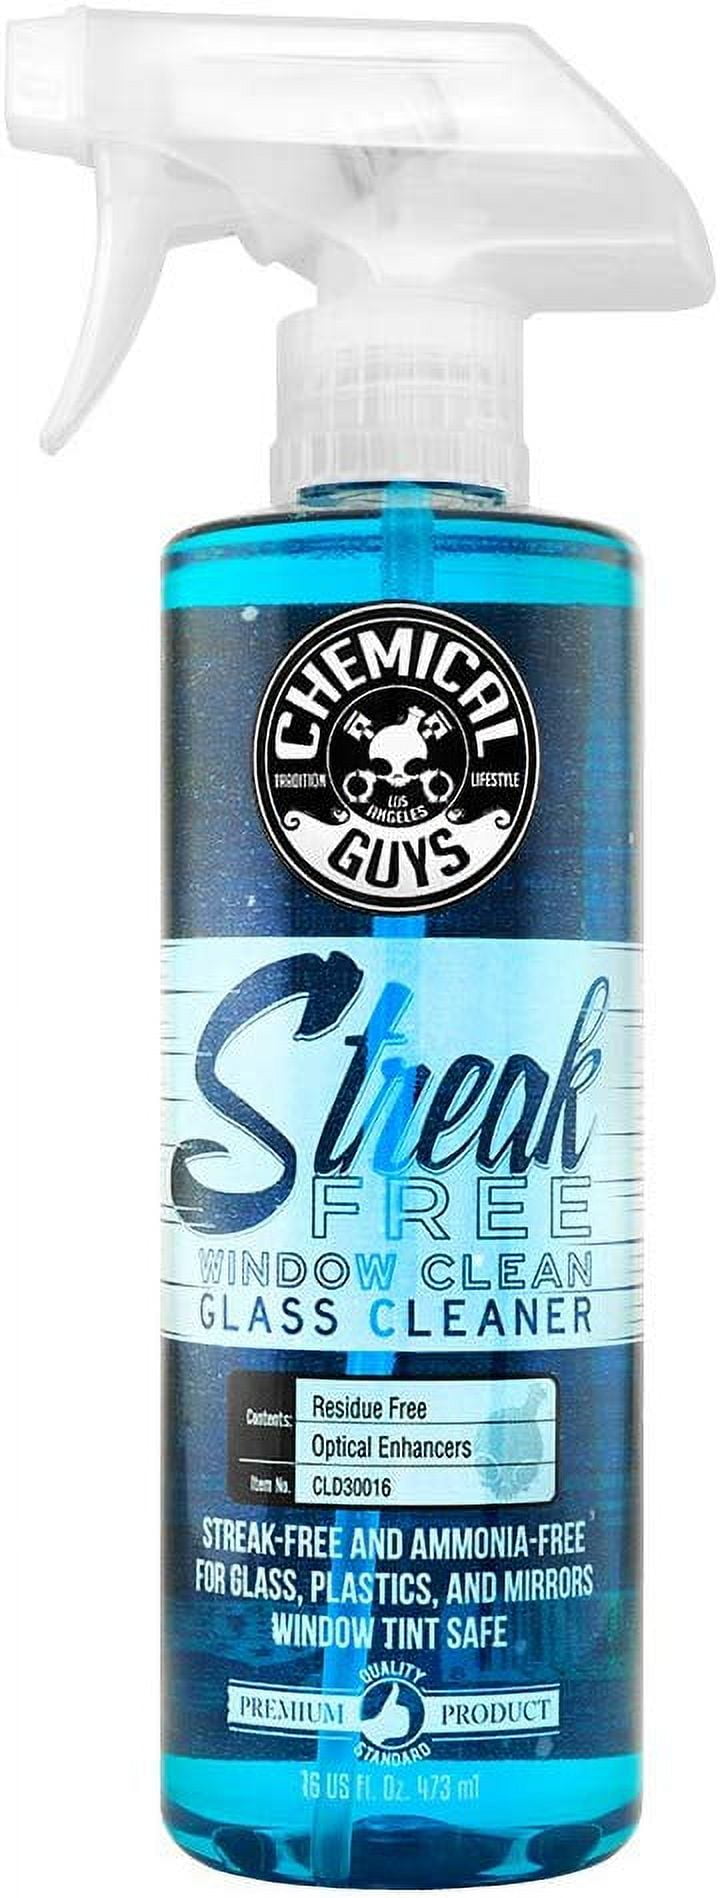 How To Streak-Free Clean Windows Inside & Out! - Chemical Guys